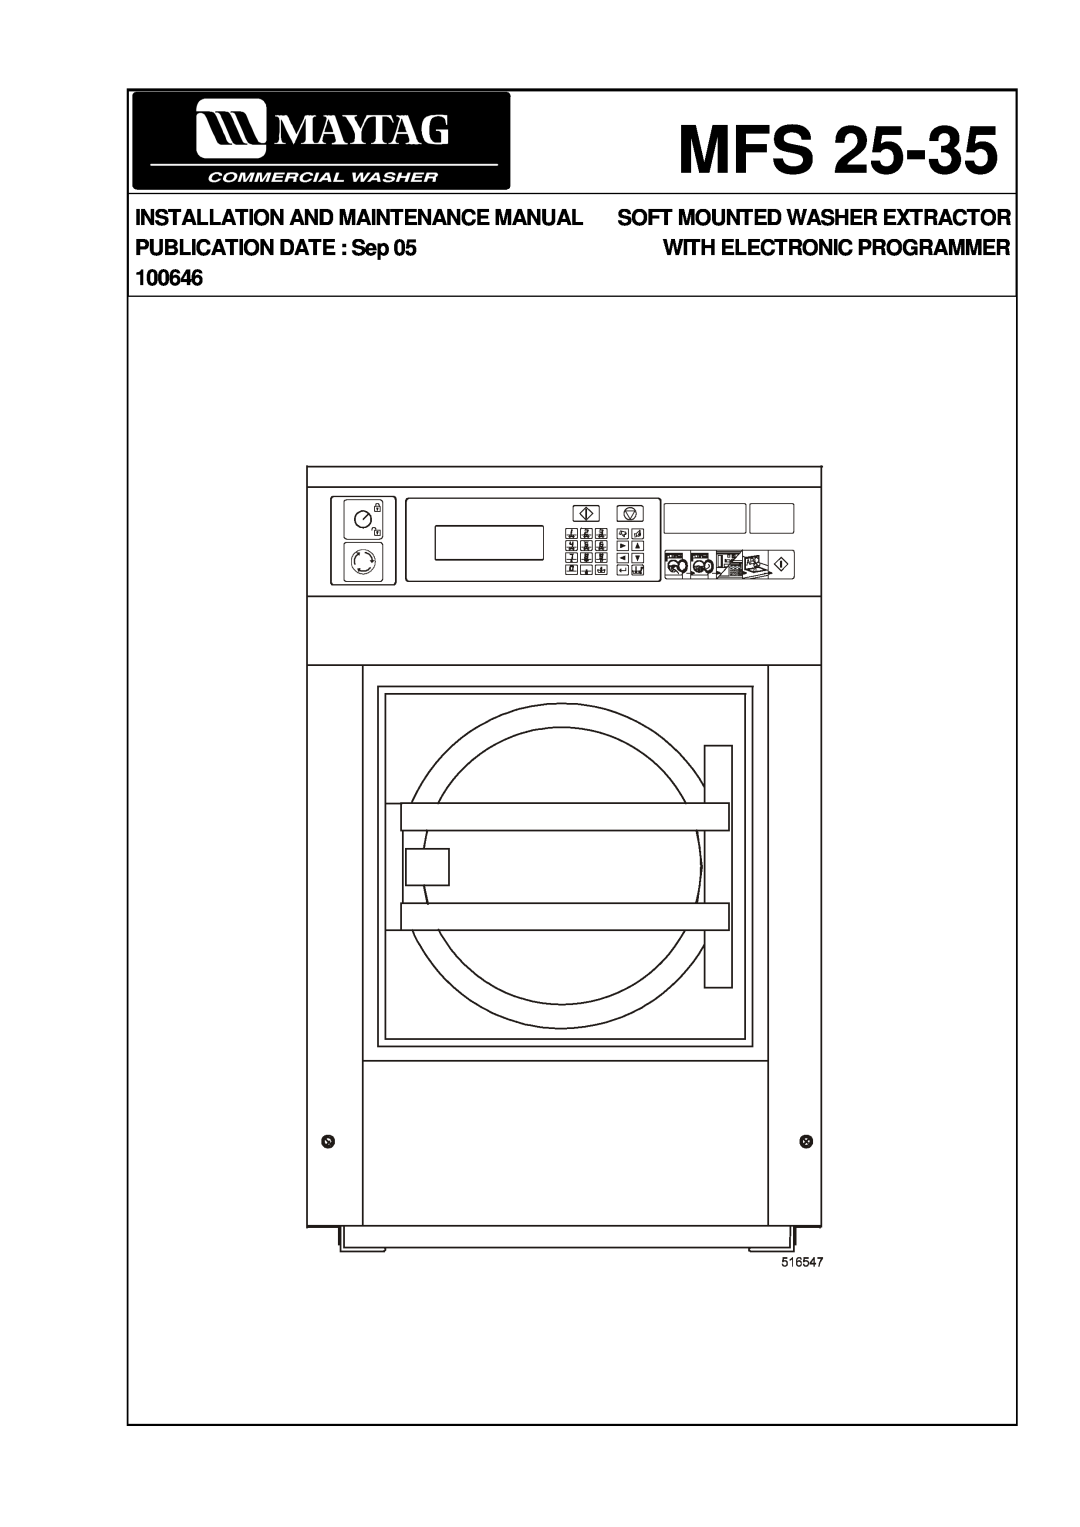 Maytag MFS 25-35 manual Installation And Maintenance Manual, PUBLICATION DATE Sep, 100646, Soft Mounted Washer Extractor 